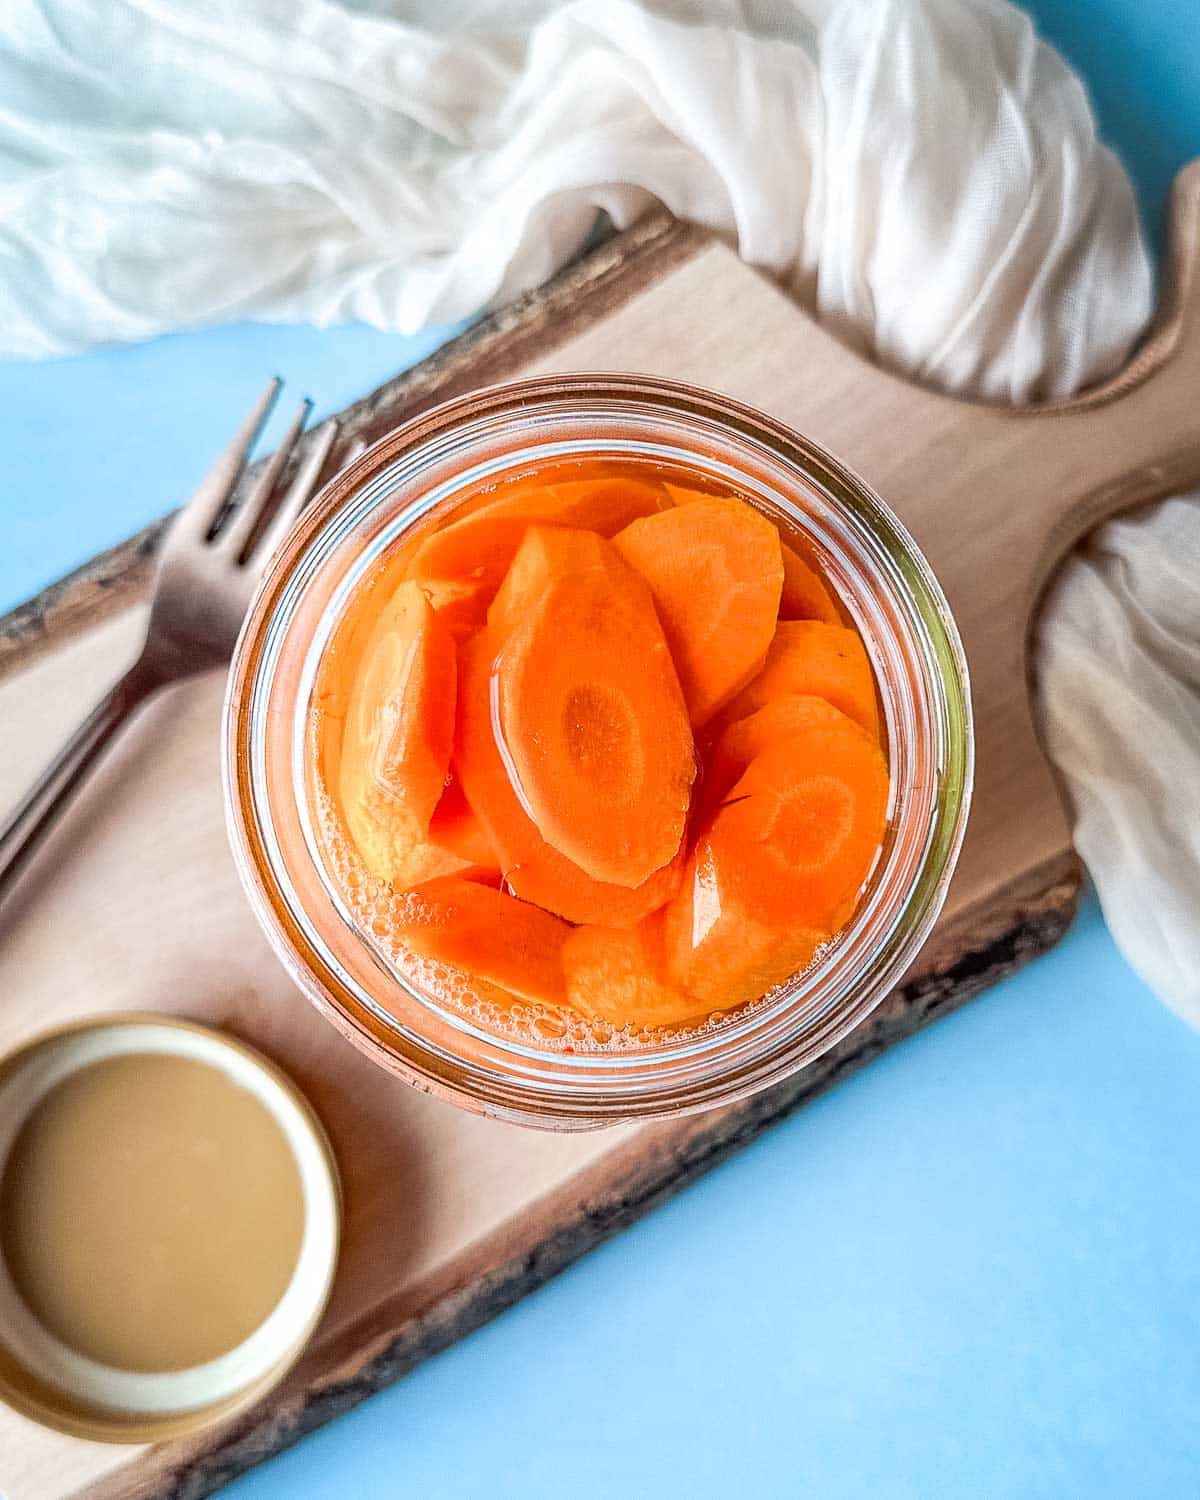 Pickled carrots in a glass jar on a wooden cutting board.